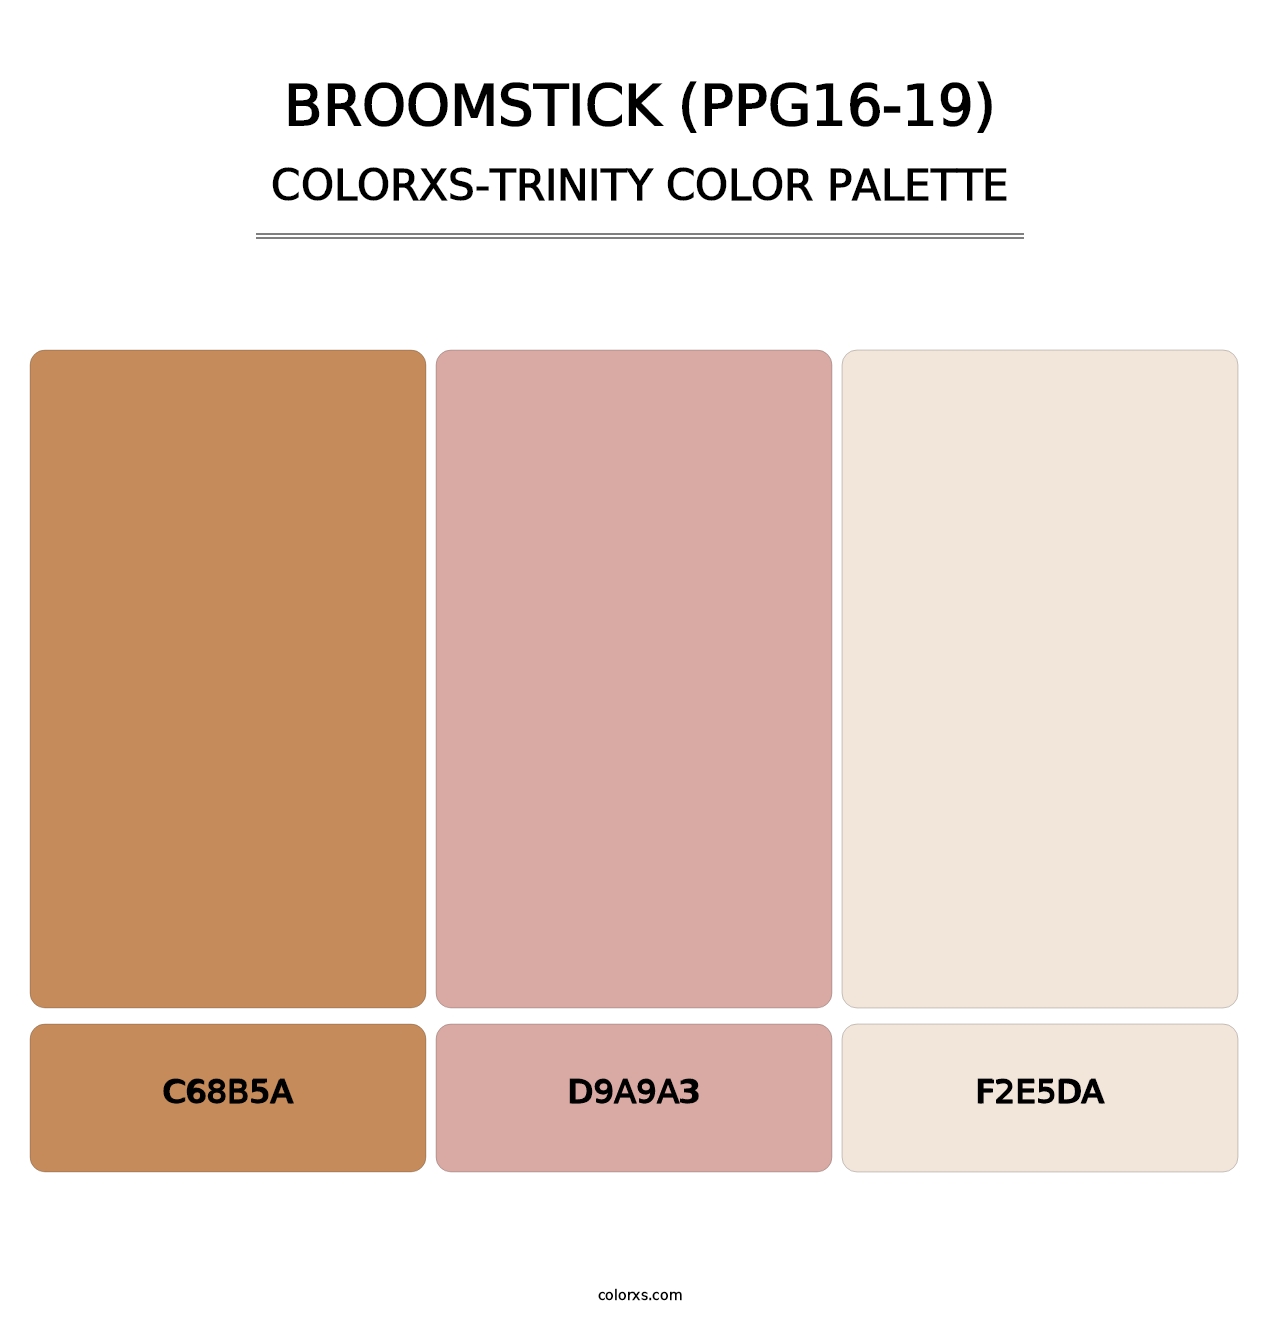 Broomstick (PPG16-19) - Colorxs Trinity Palette